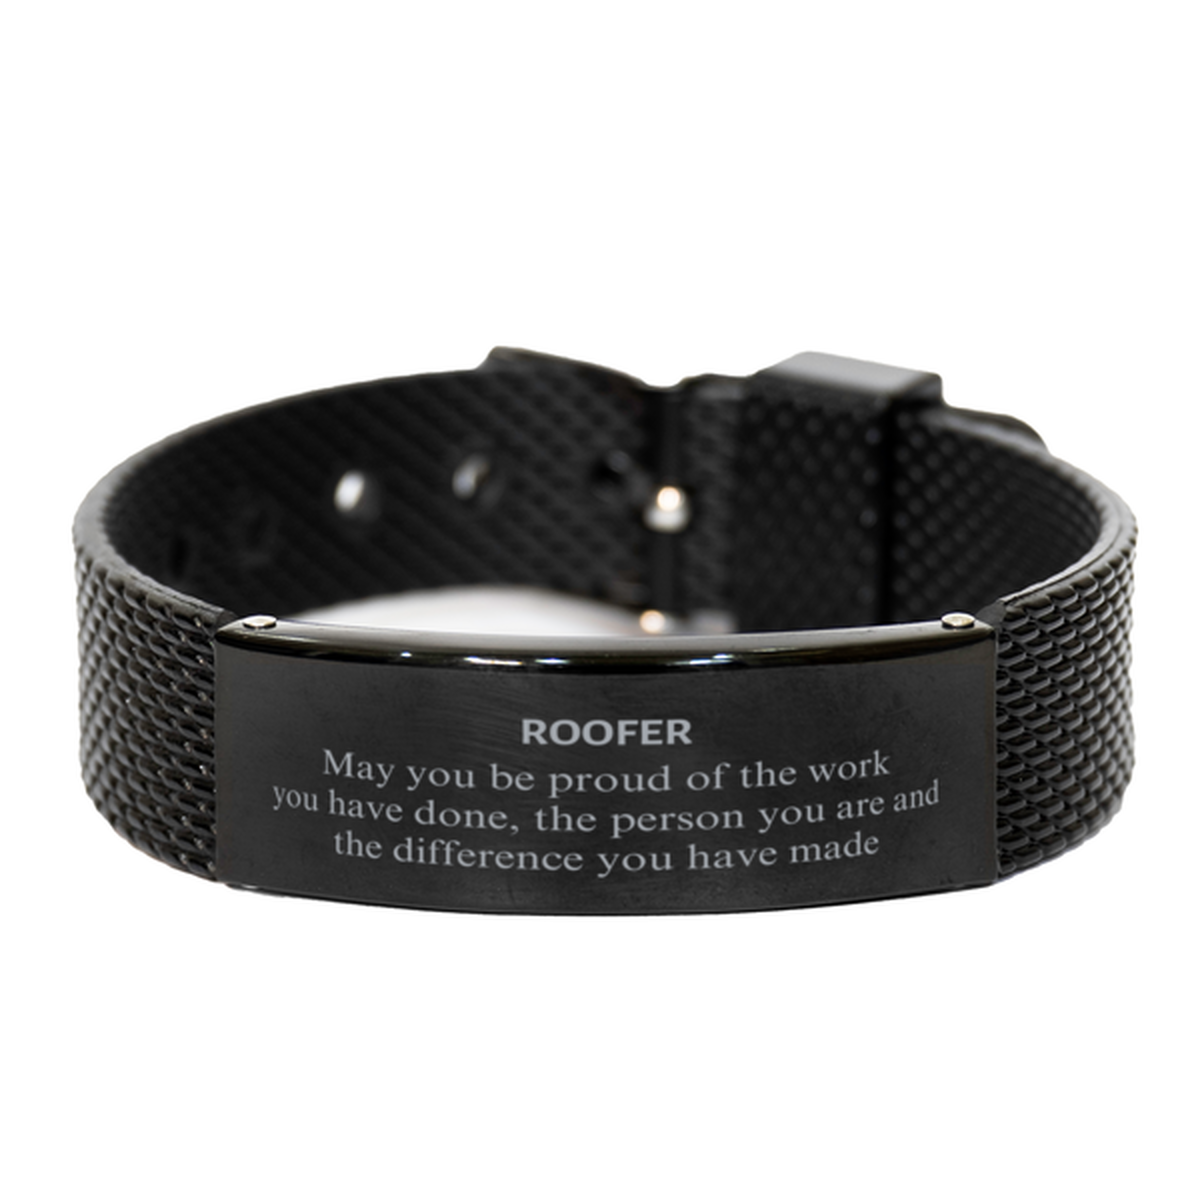 Roofer May you be proud of the work you have done, Retirement Roofer Black Shark Mesh Bracelet for Colleague Appreciation Gifts Amazing for Roofer